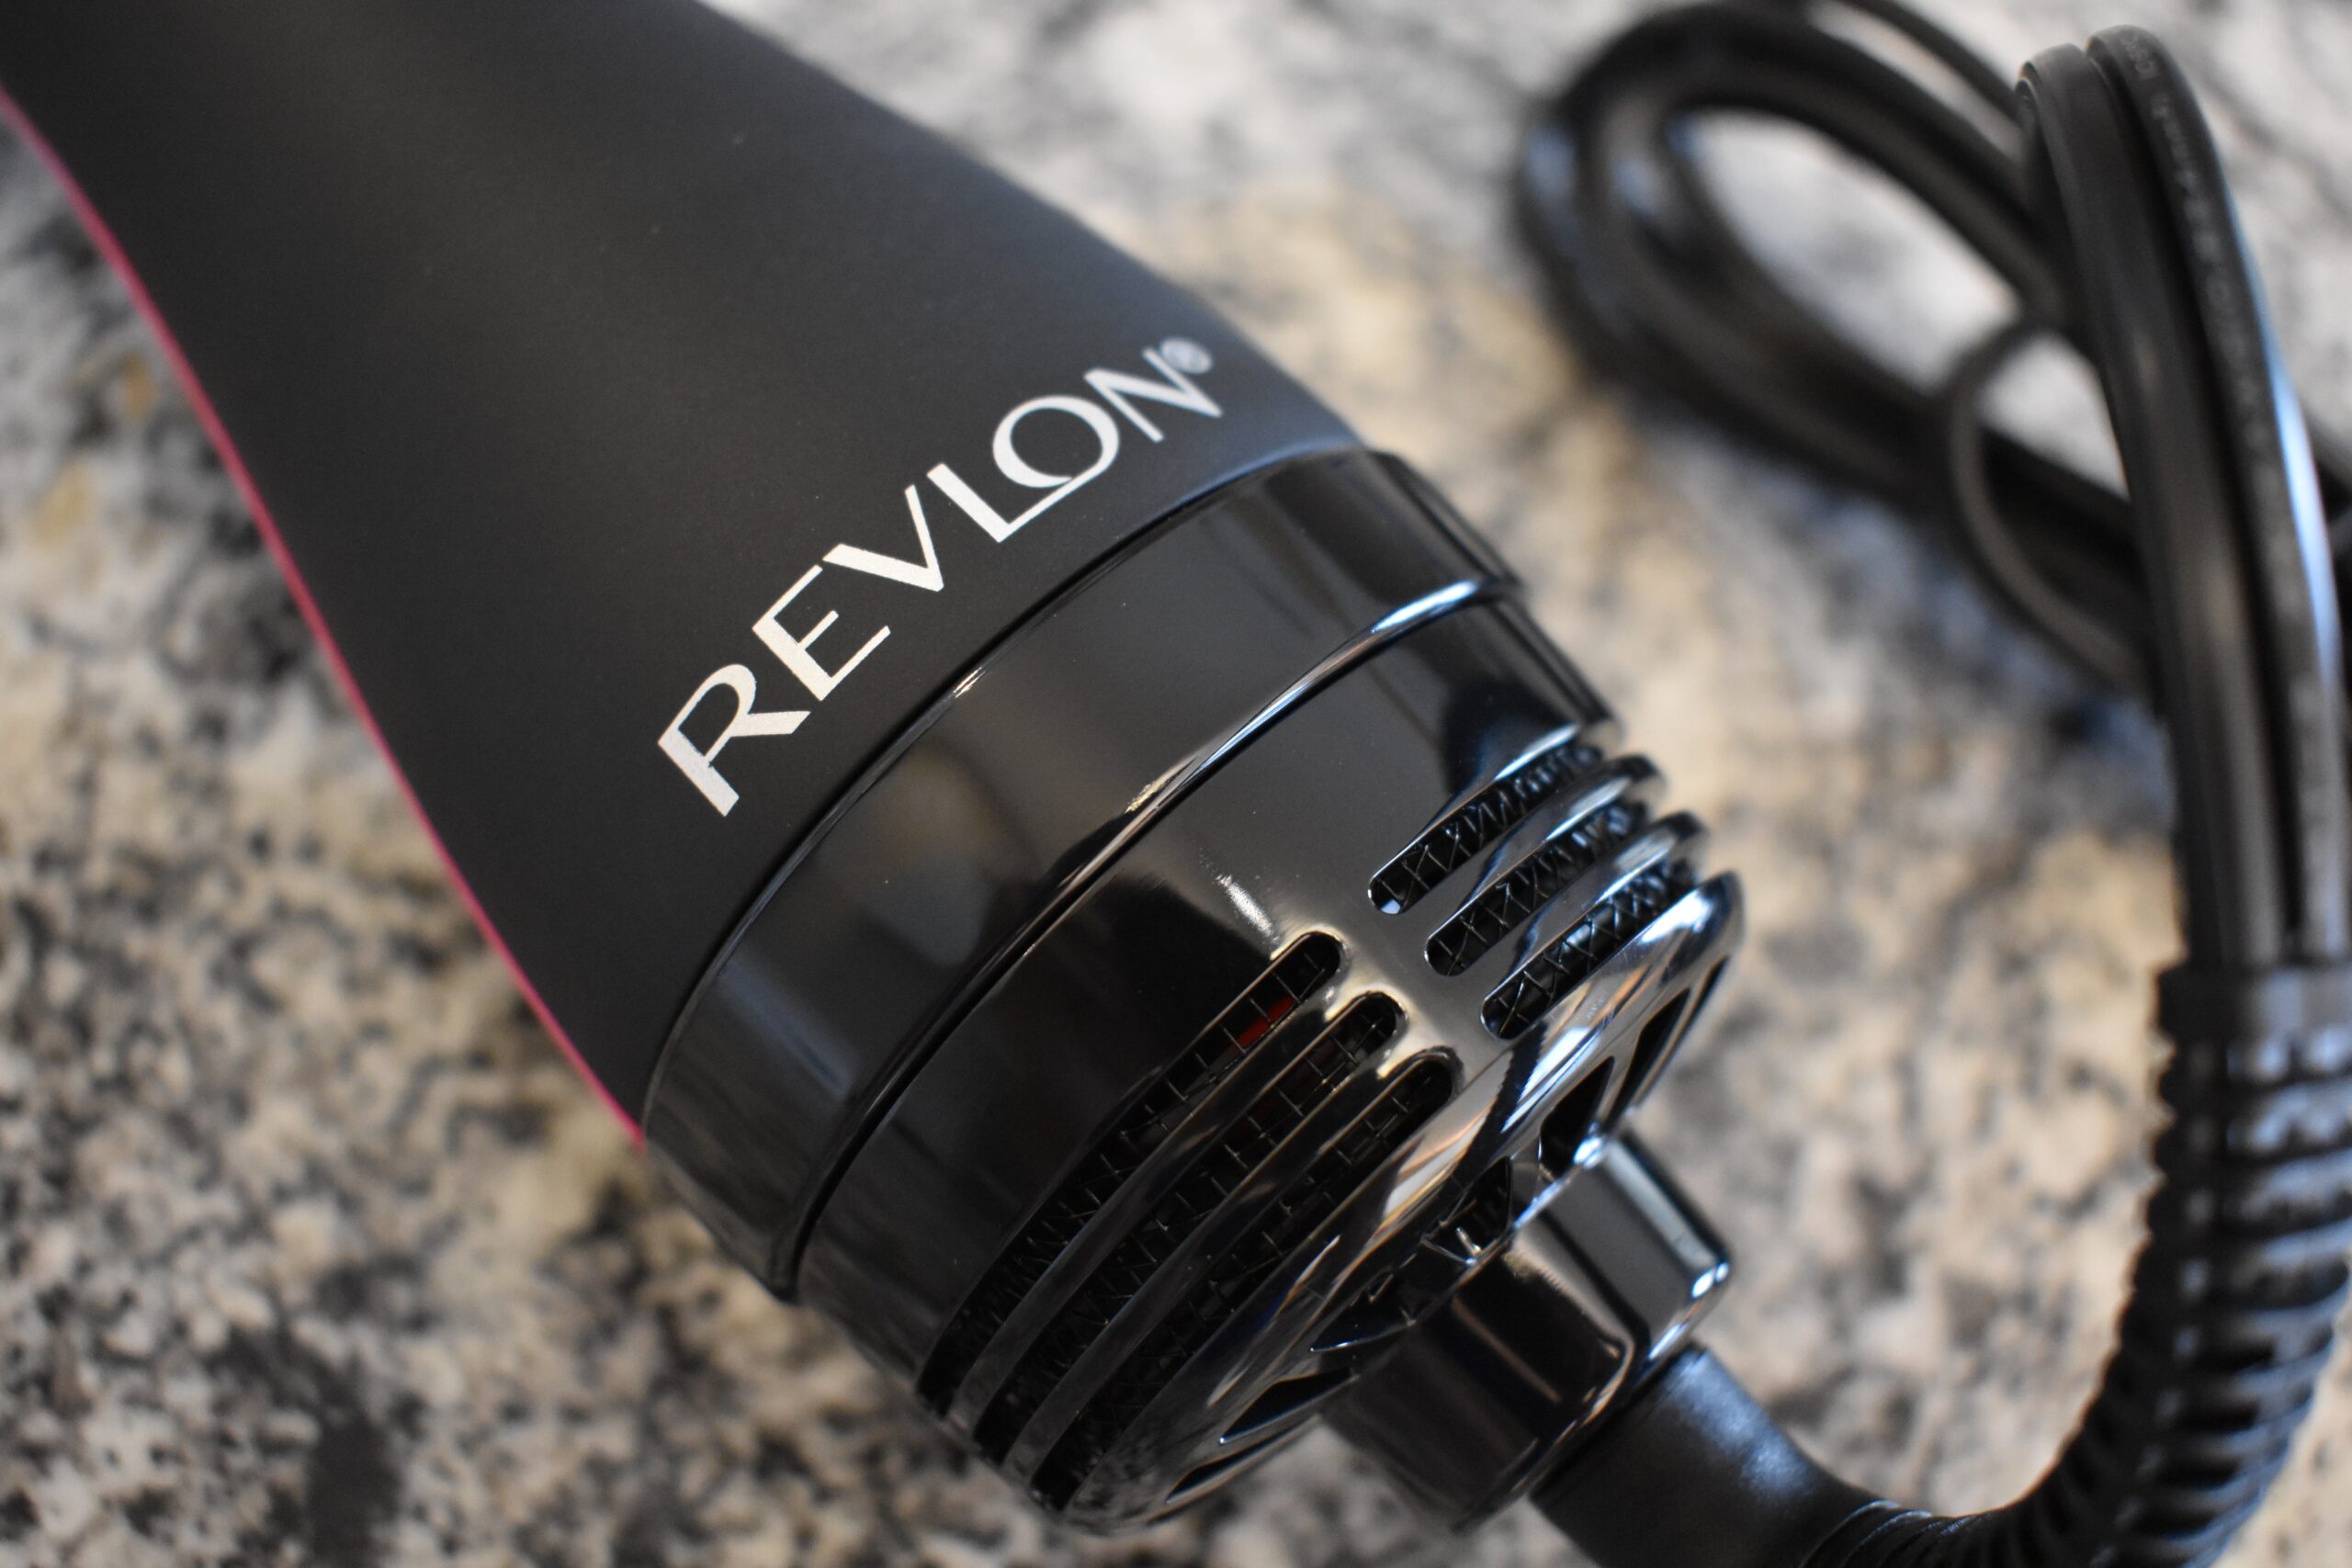 Close up of the Revlon electric air hair brush